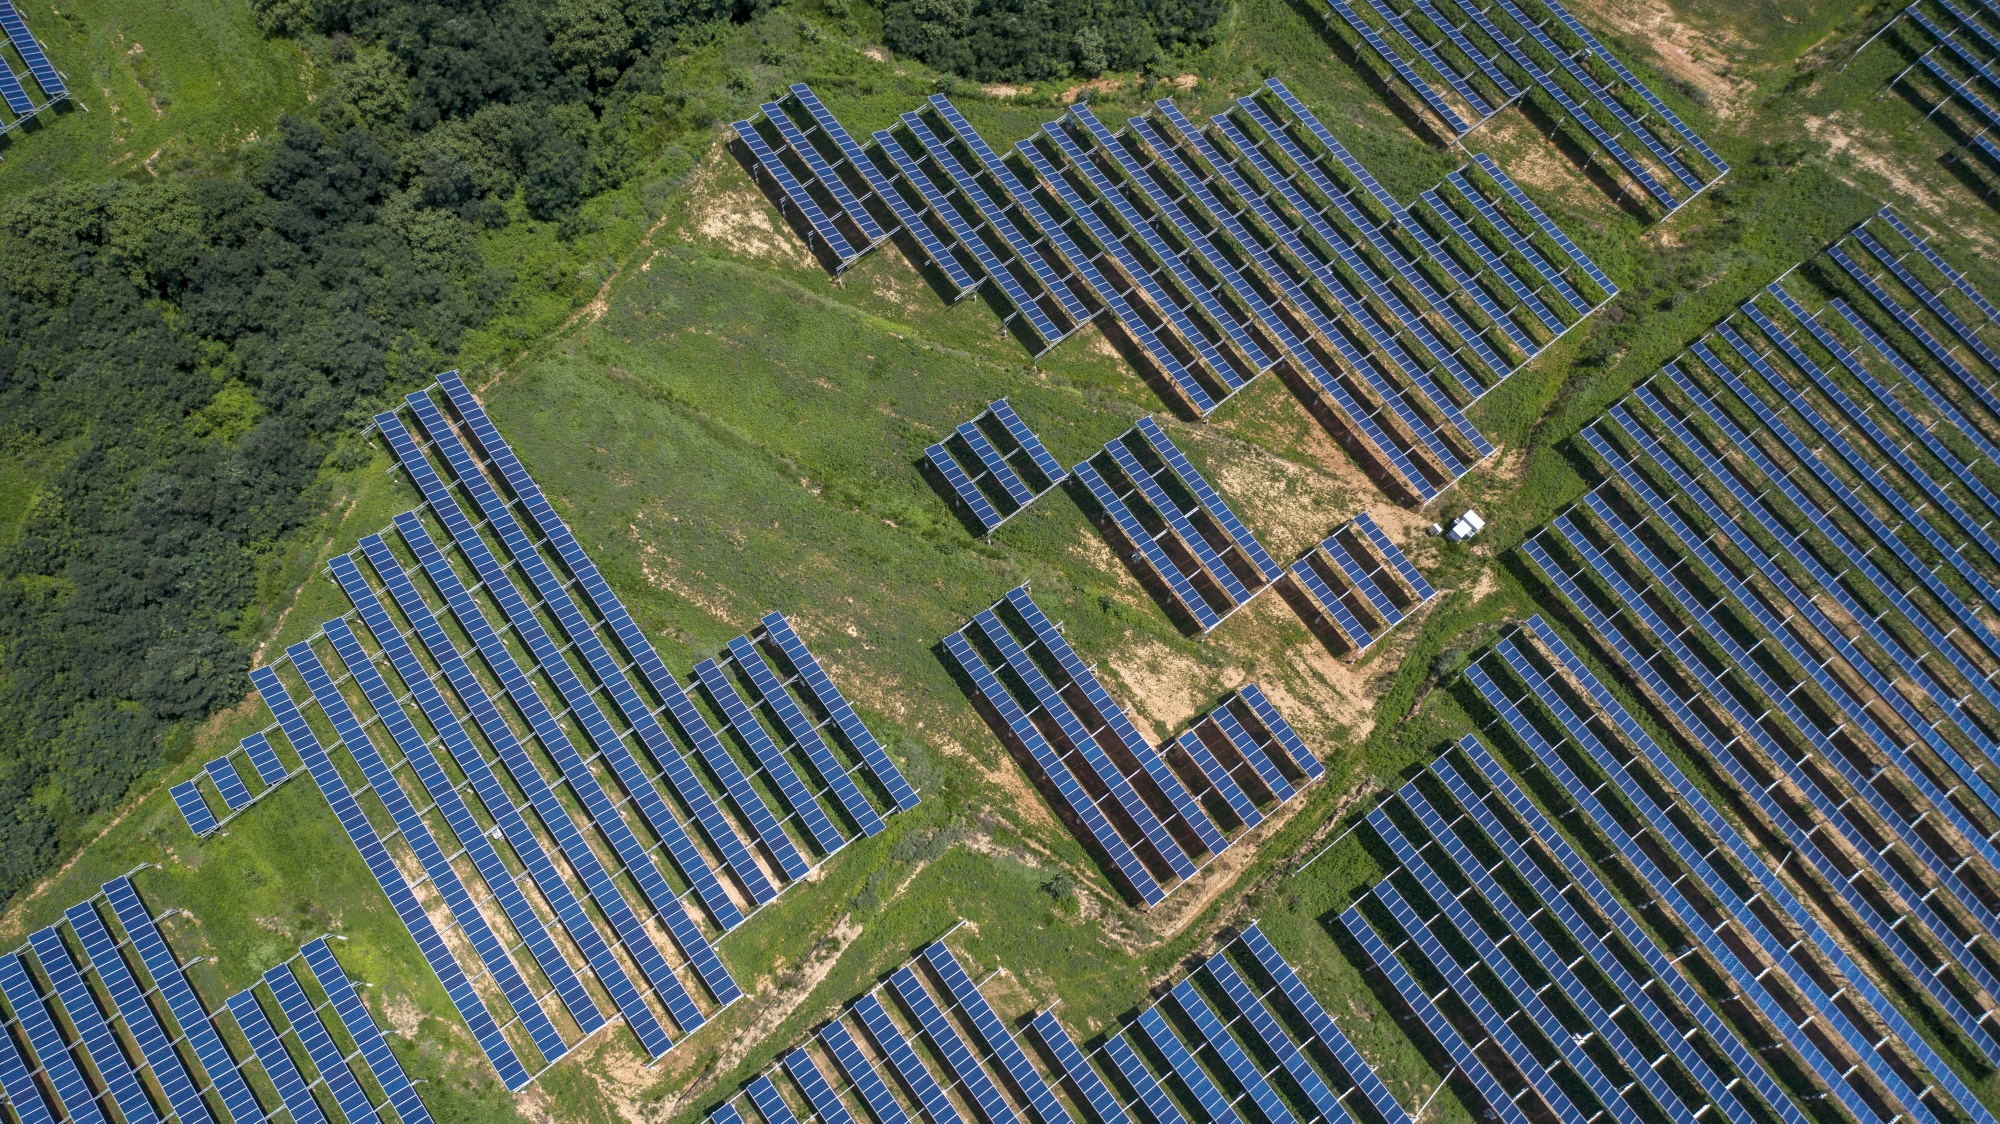 Photovoltaic modules at a solar power plant&nbsp;in Tongchuan, Shaanxi Province, China.&nbsp;